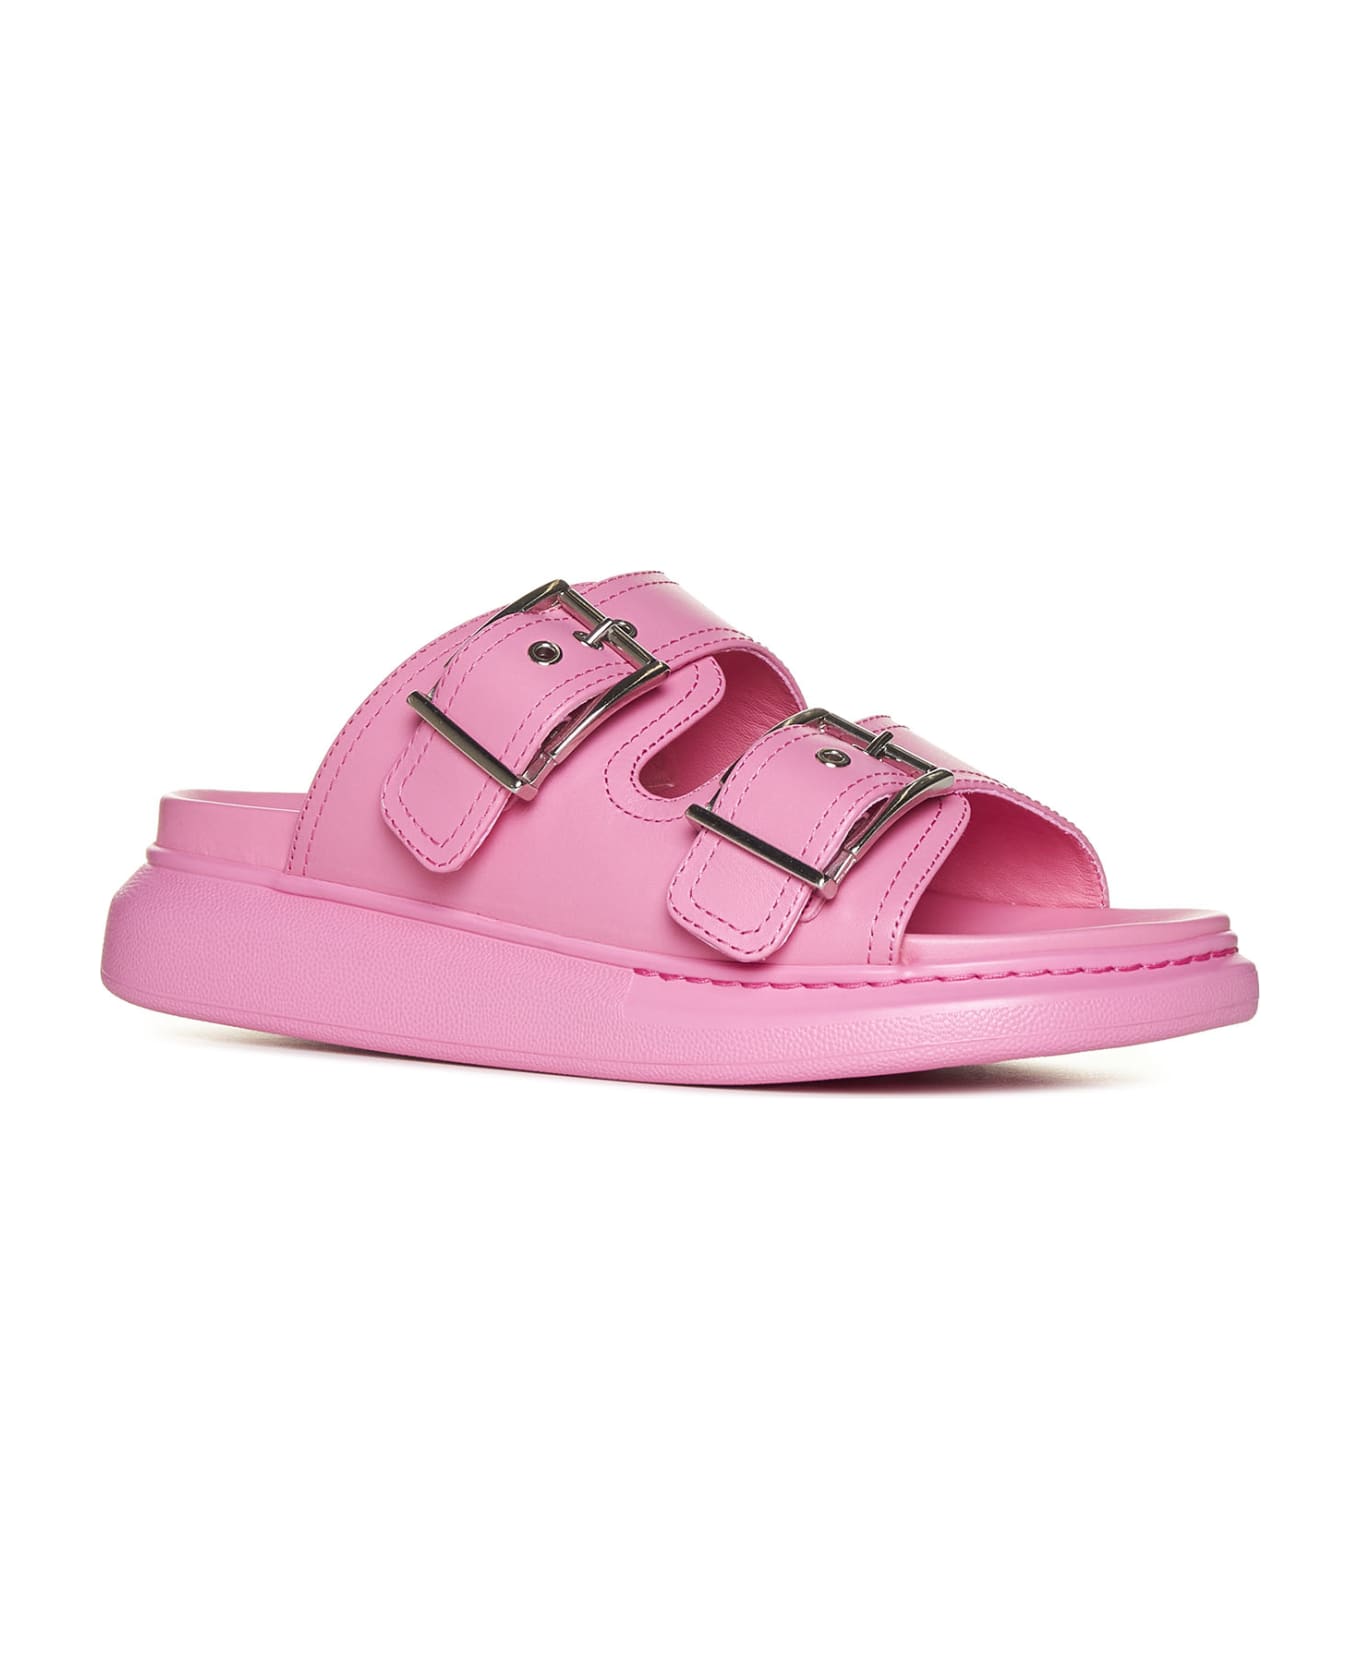 Alexander McQueen Pink And Silver Hybrid Sandal - It was only matter of time till KISS was featured on a pair of sneakers